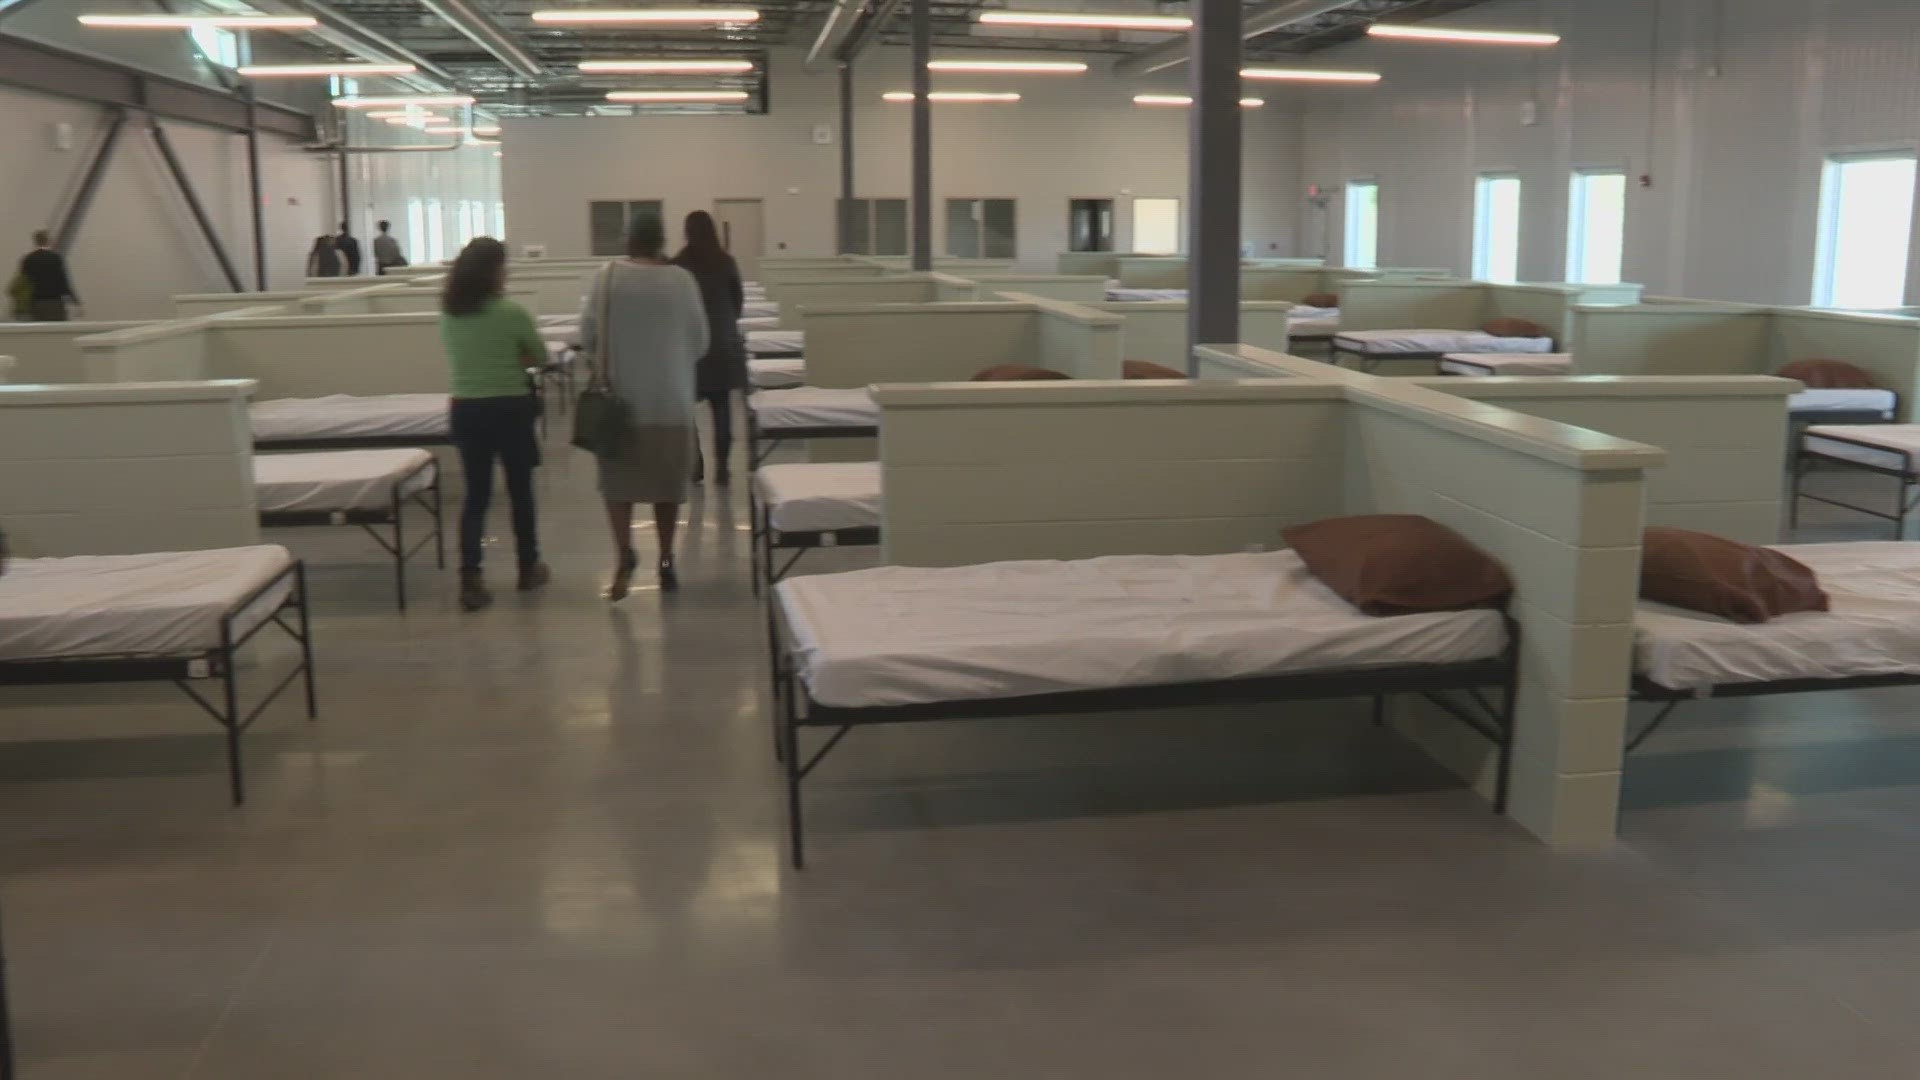 The Homeless Services Center on Riverside Street opened for guests Tuesday, and all but one bed was occupied.